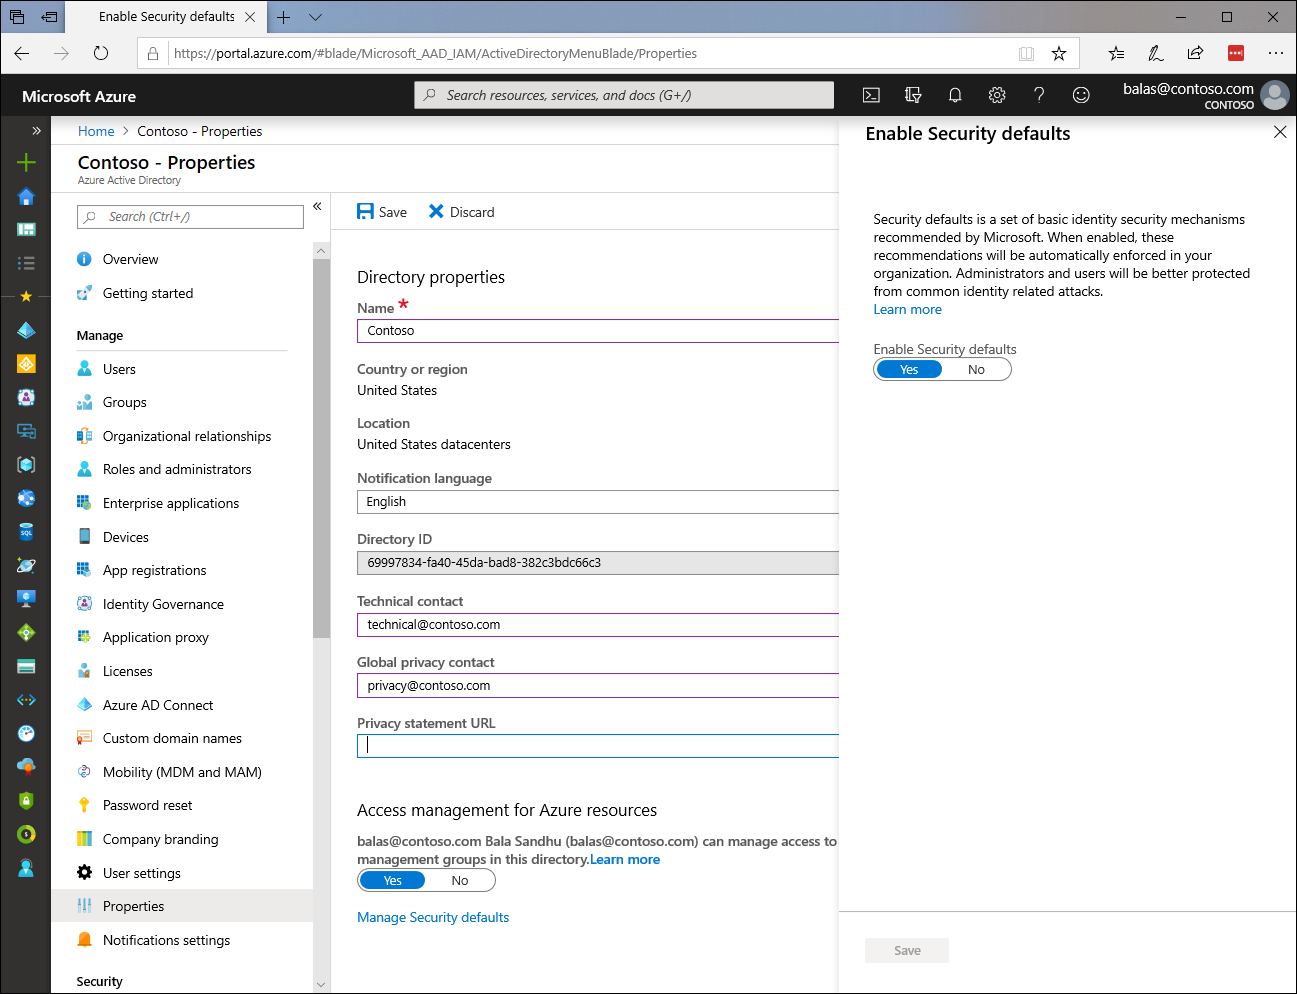 A screenshot showing the option to enable Security Defaults within the Azure AD portal.